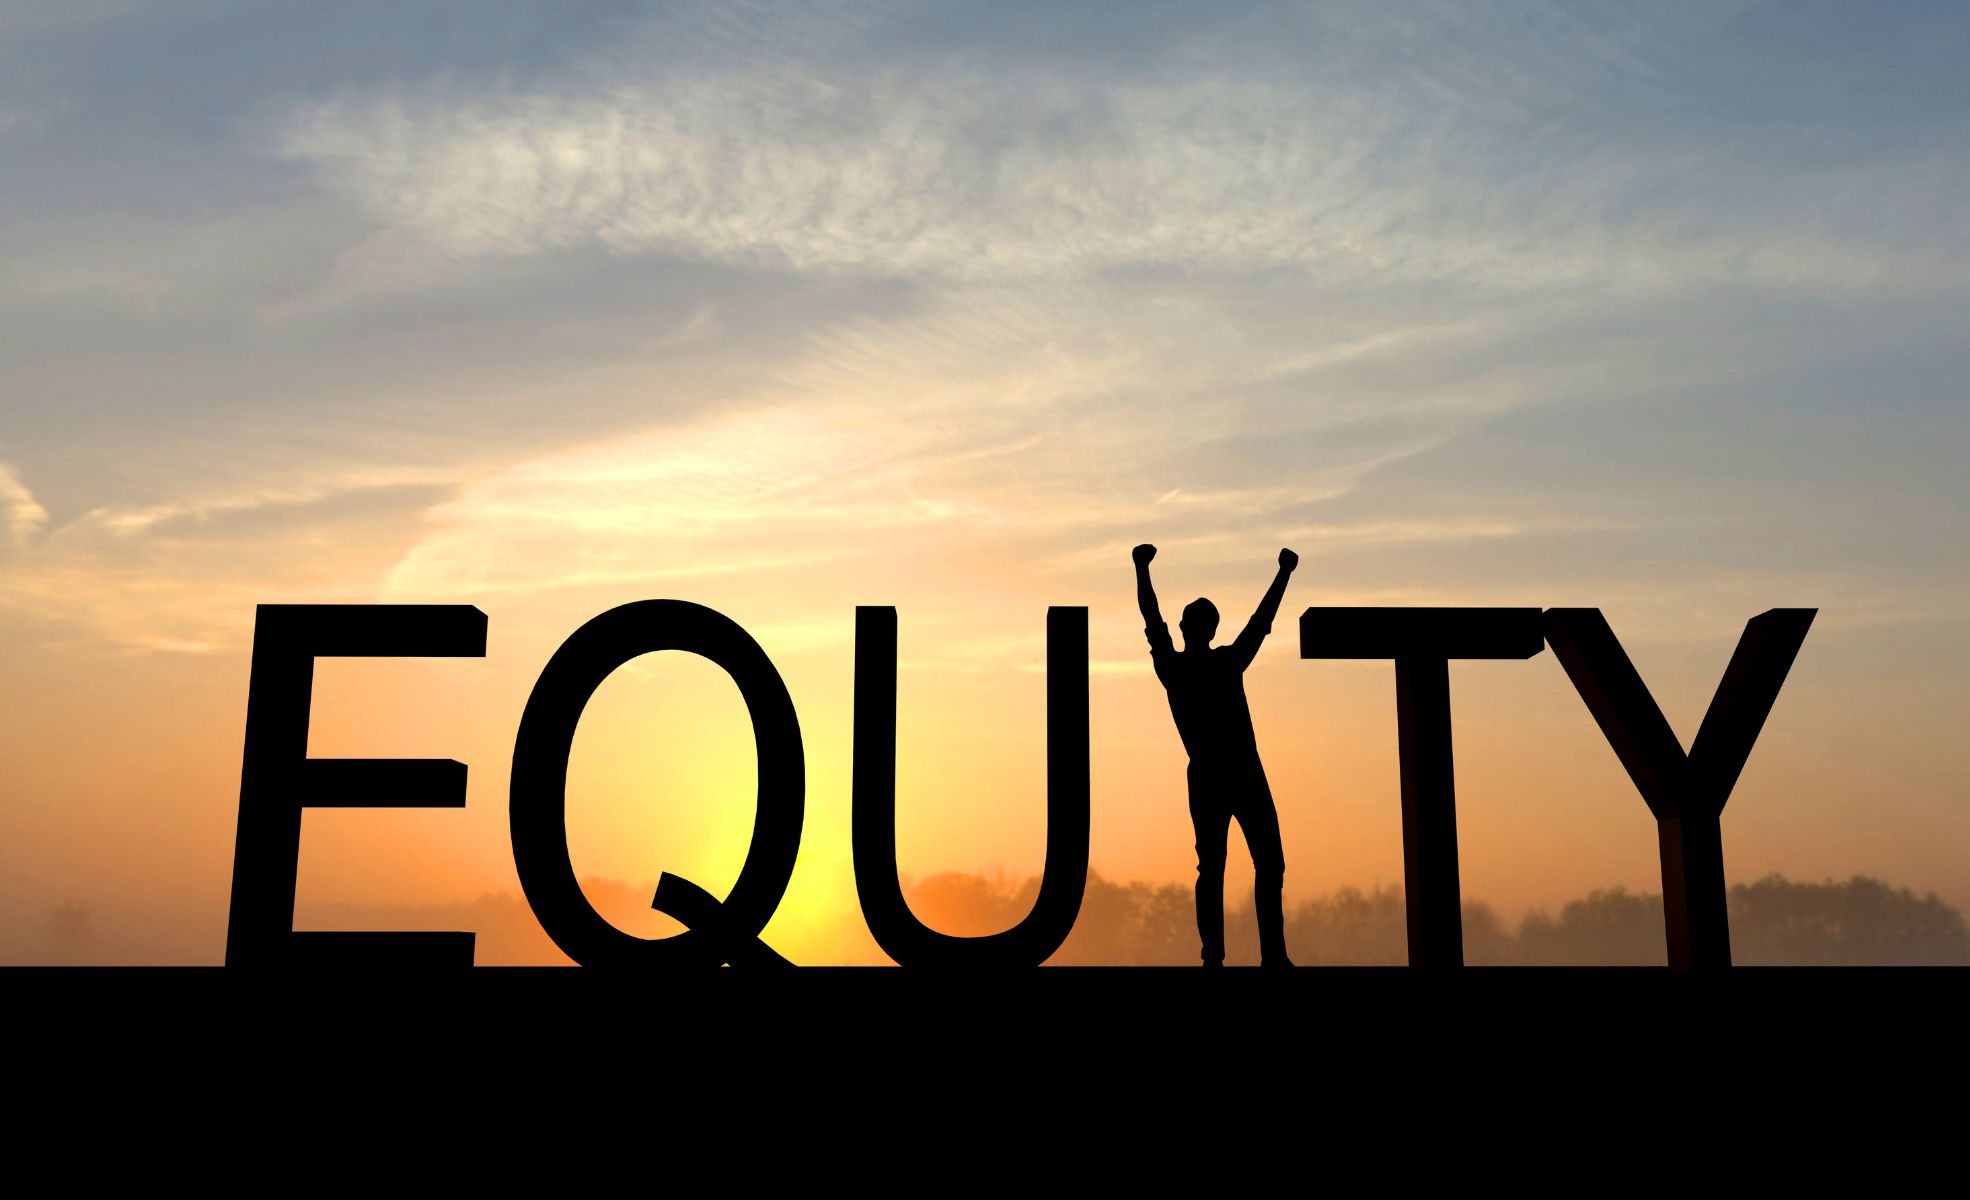 Equity Spelled With Human As The "I"